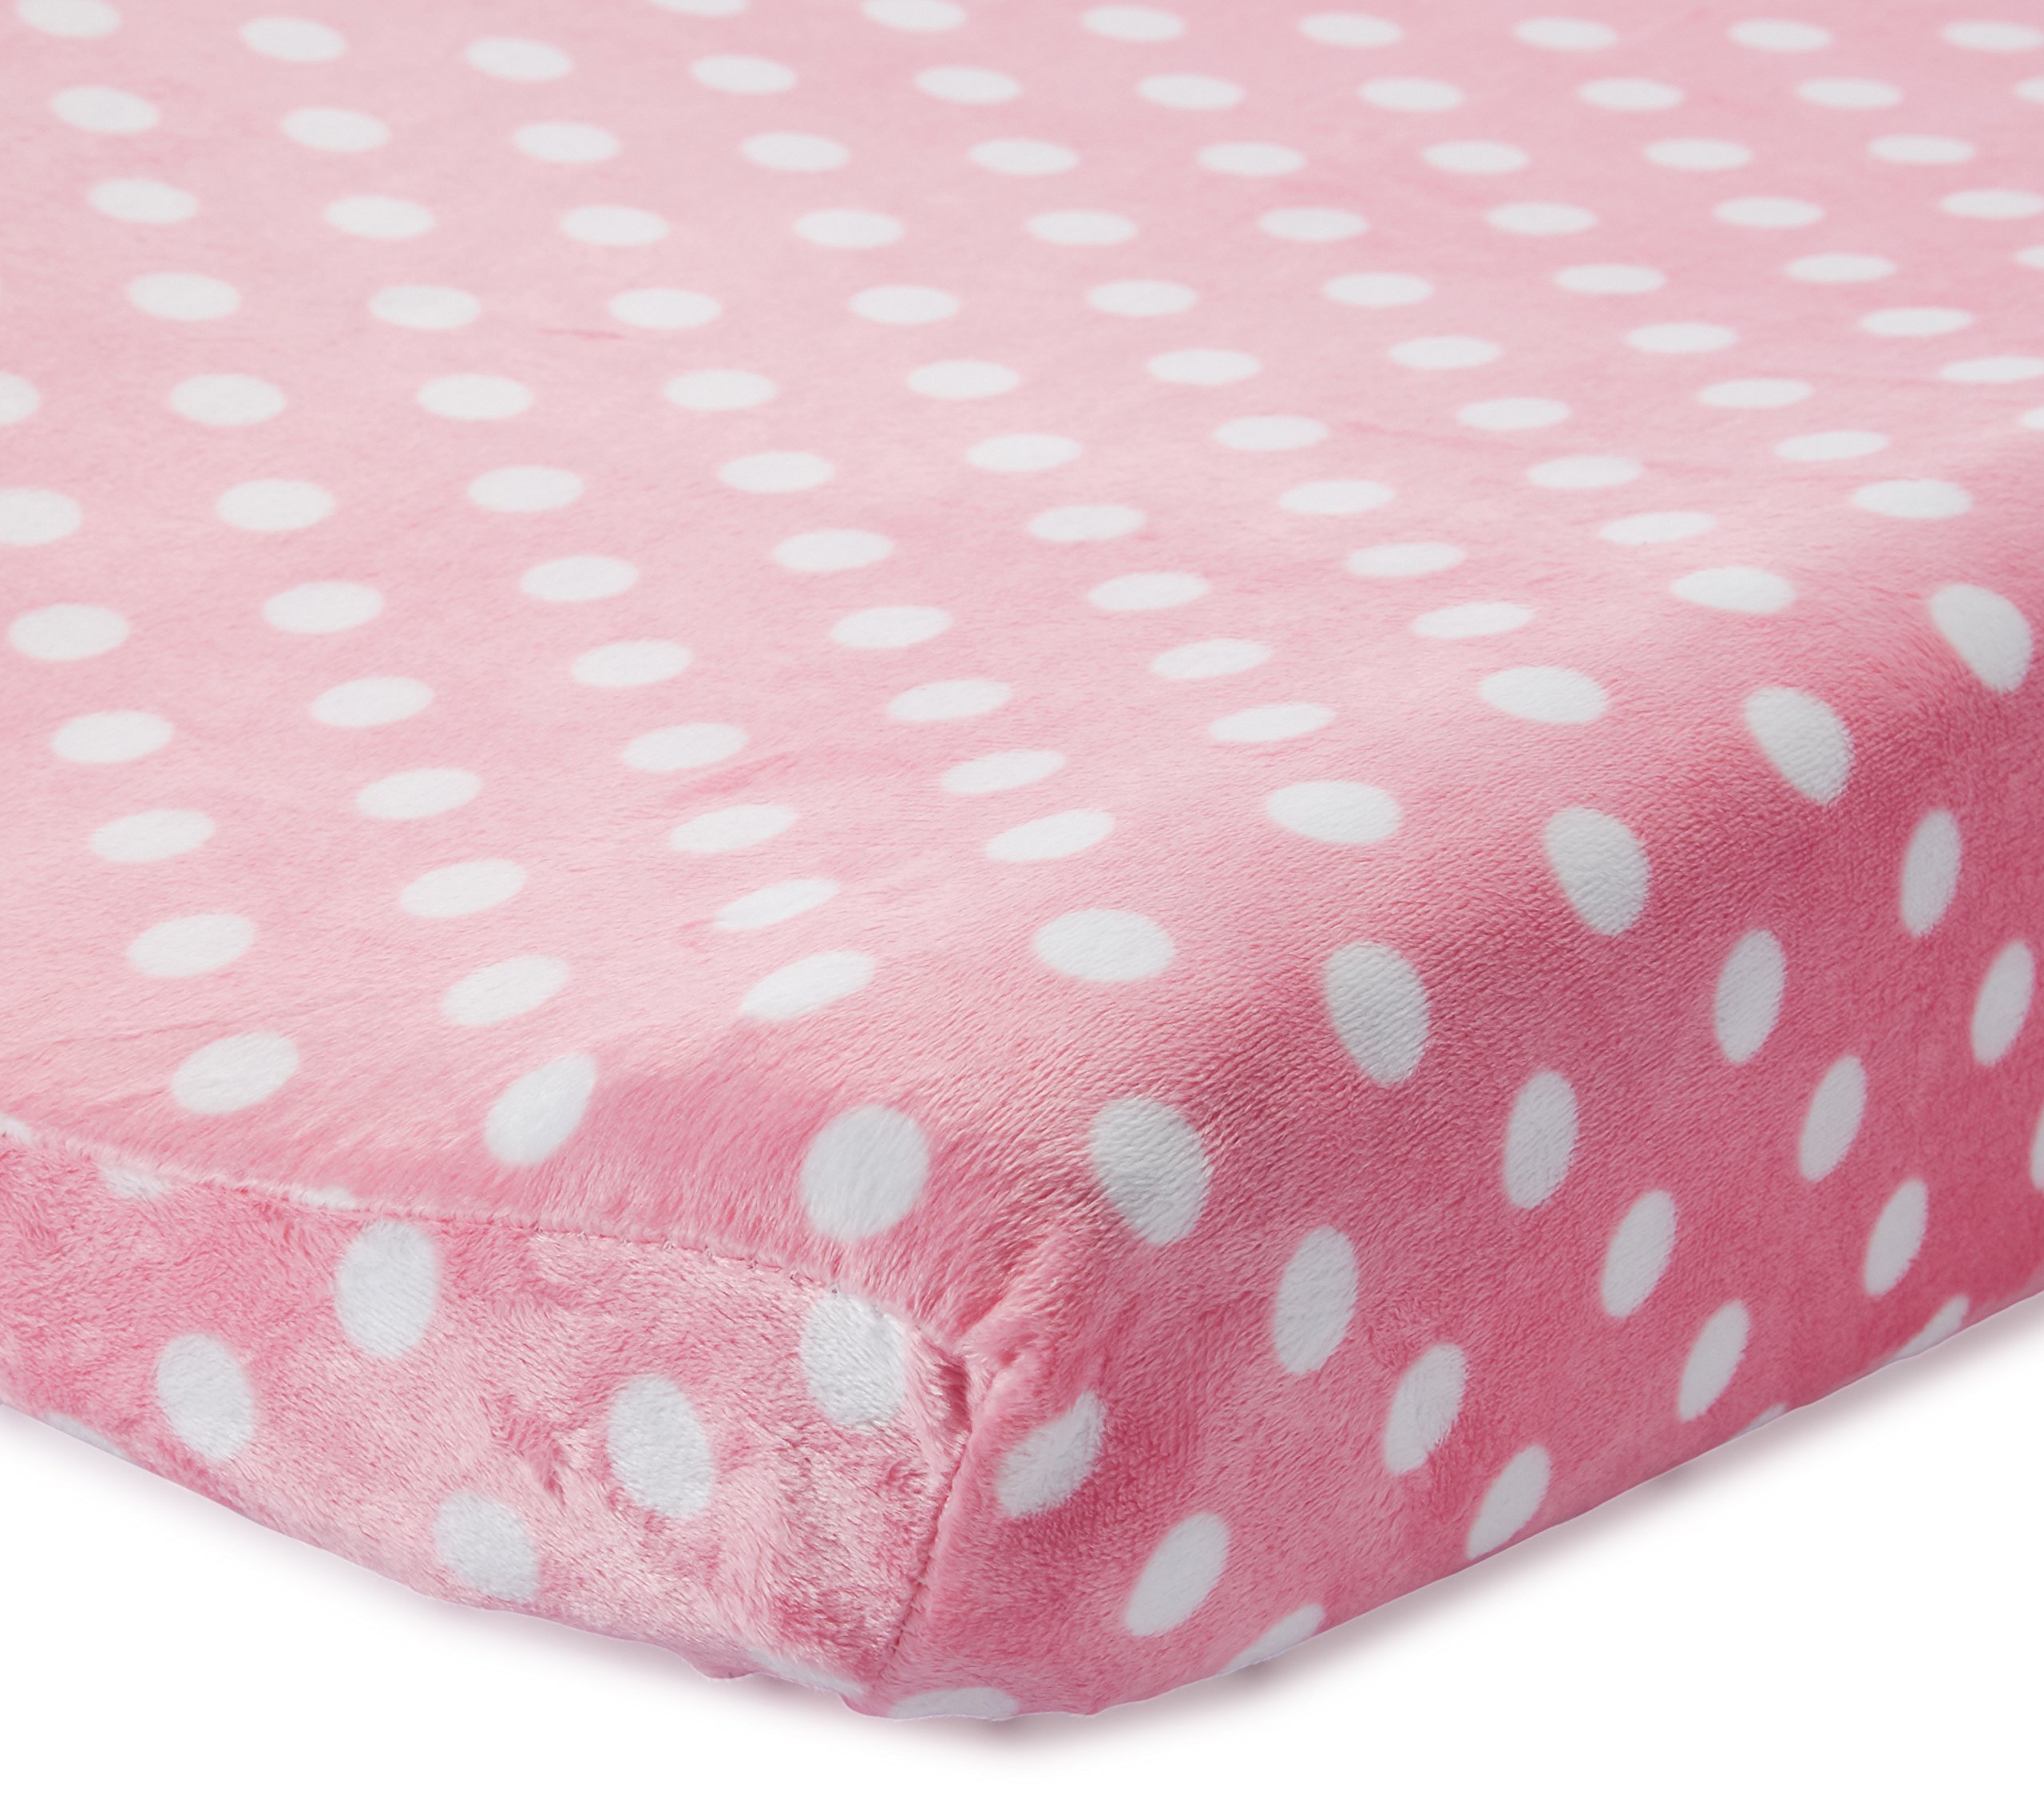 Summer Ultra Plush Changing Pad Cover, Pink Dots for Days